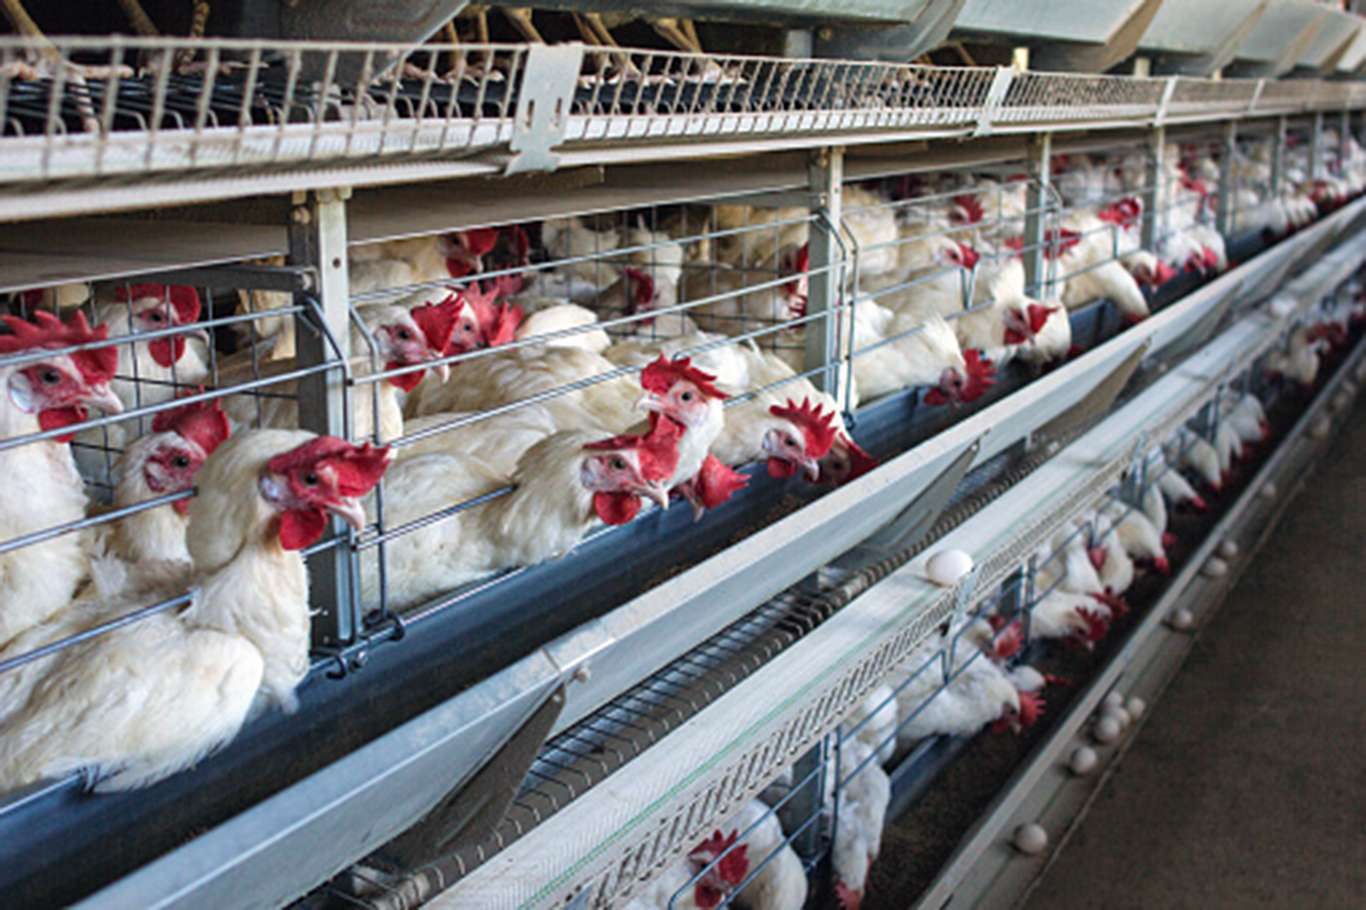 About 220,000 chickens culled after bird flu discovered on farms in Netherlands 